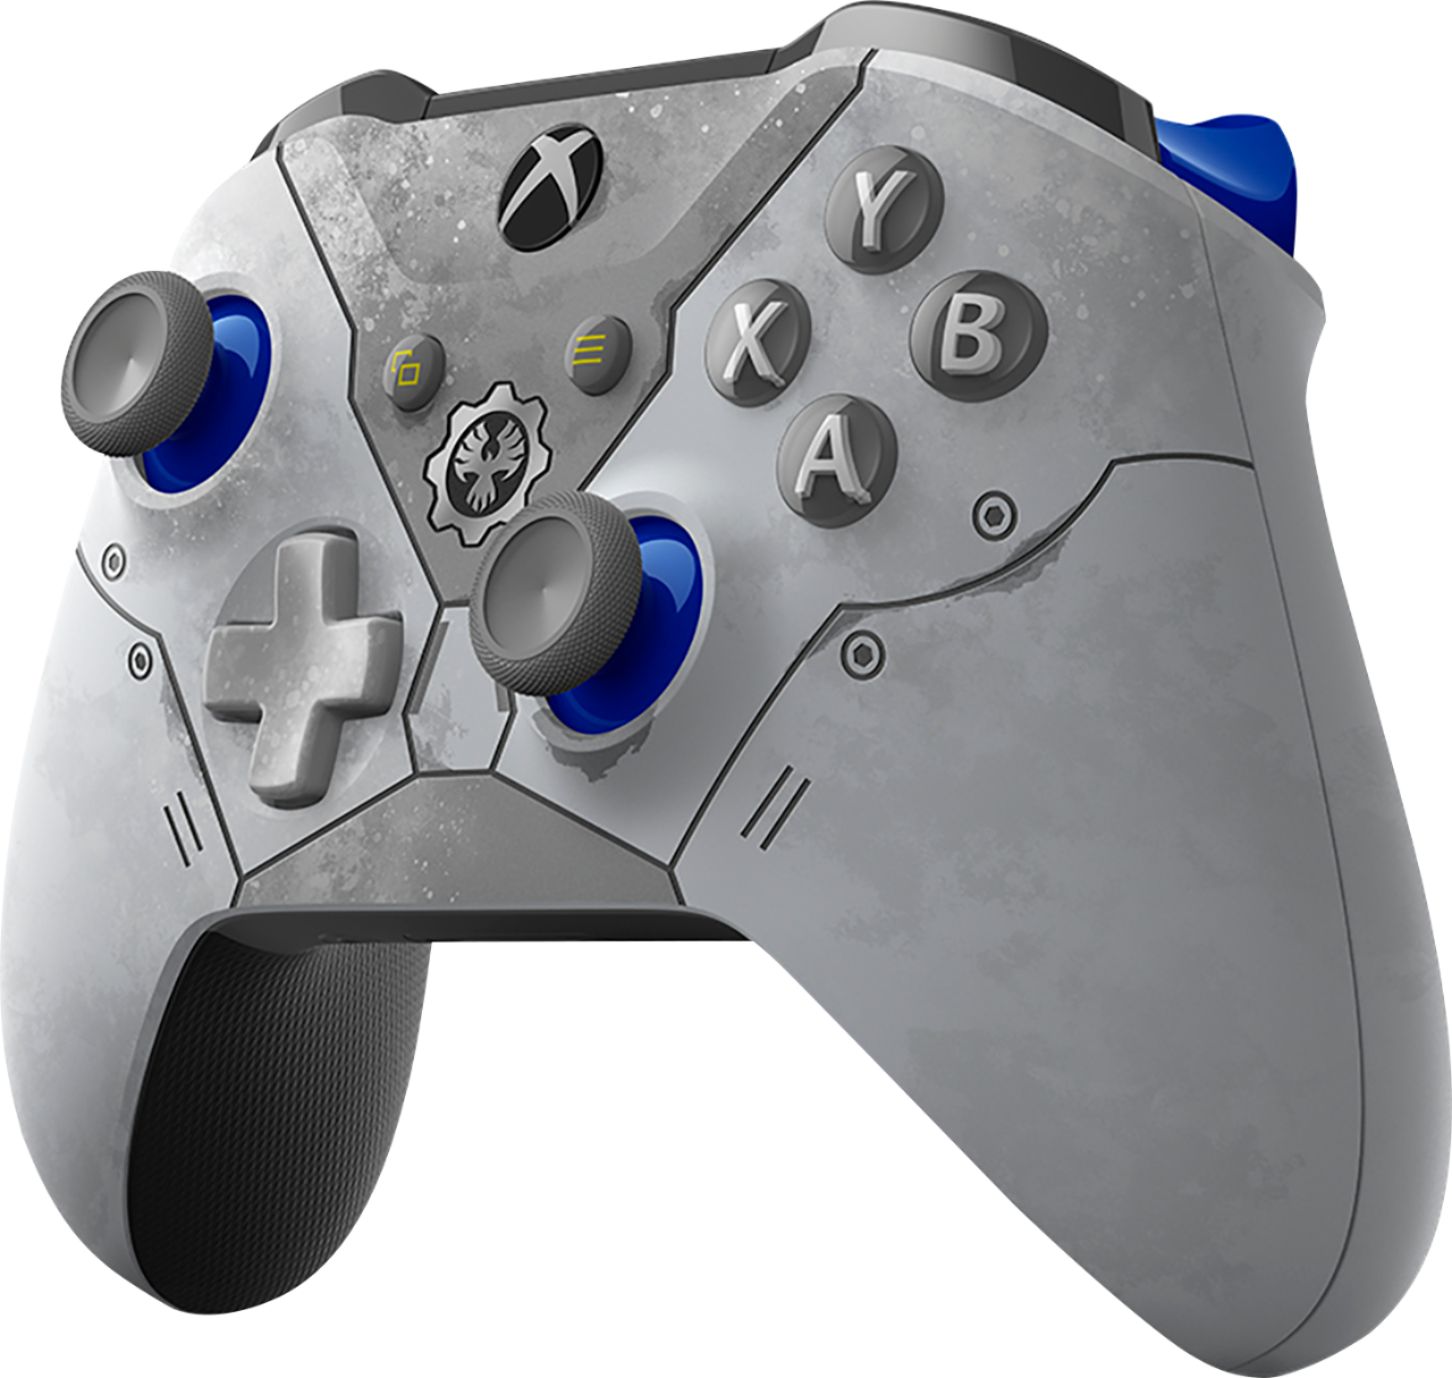 Left View: Microsoft - Geek Squad Certified Refurbished Xbox Gears 5 Kait Diaz Limited Edition Wireless Controller for PC, Xbox One, One S & X - White